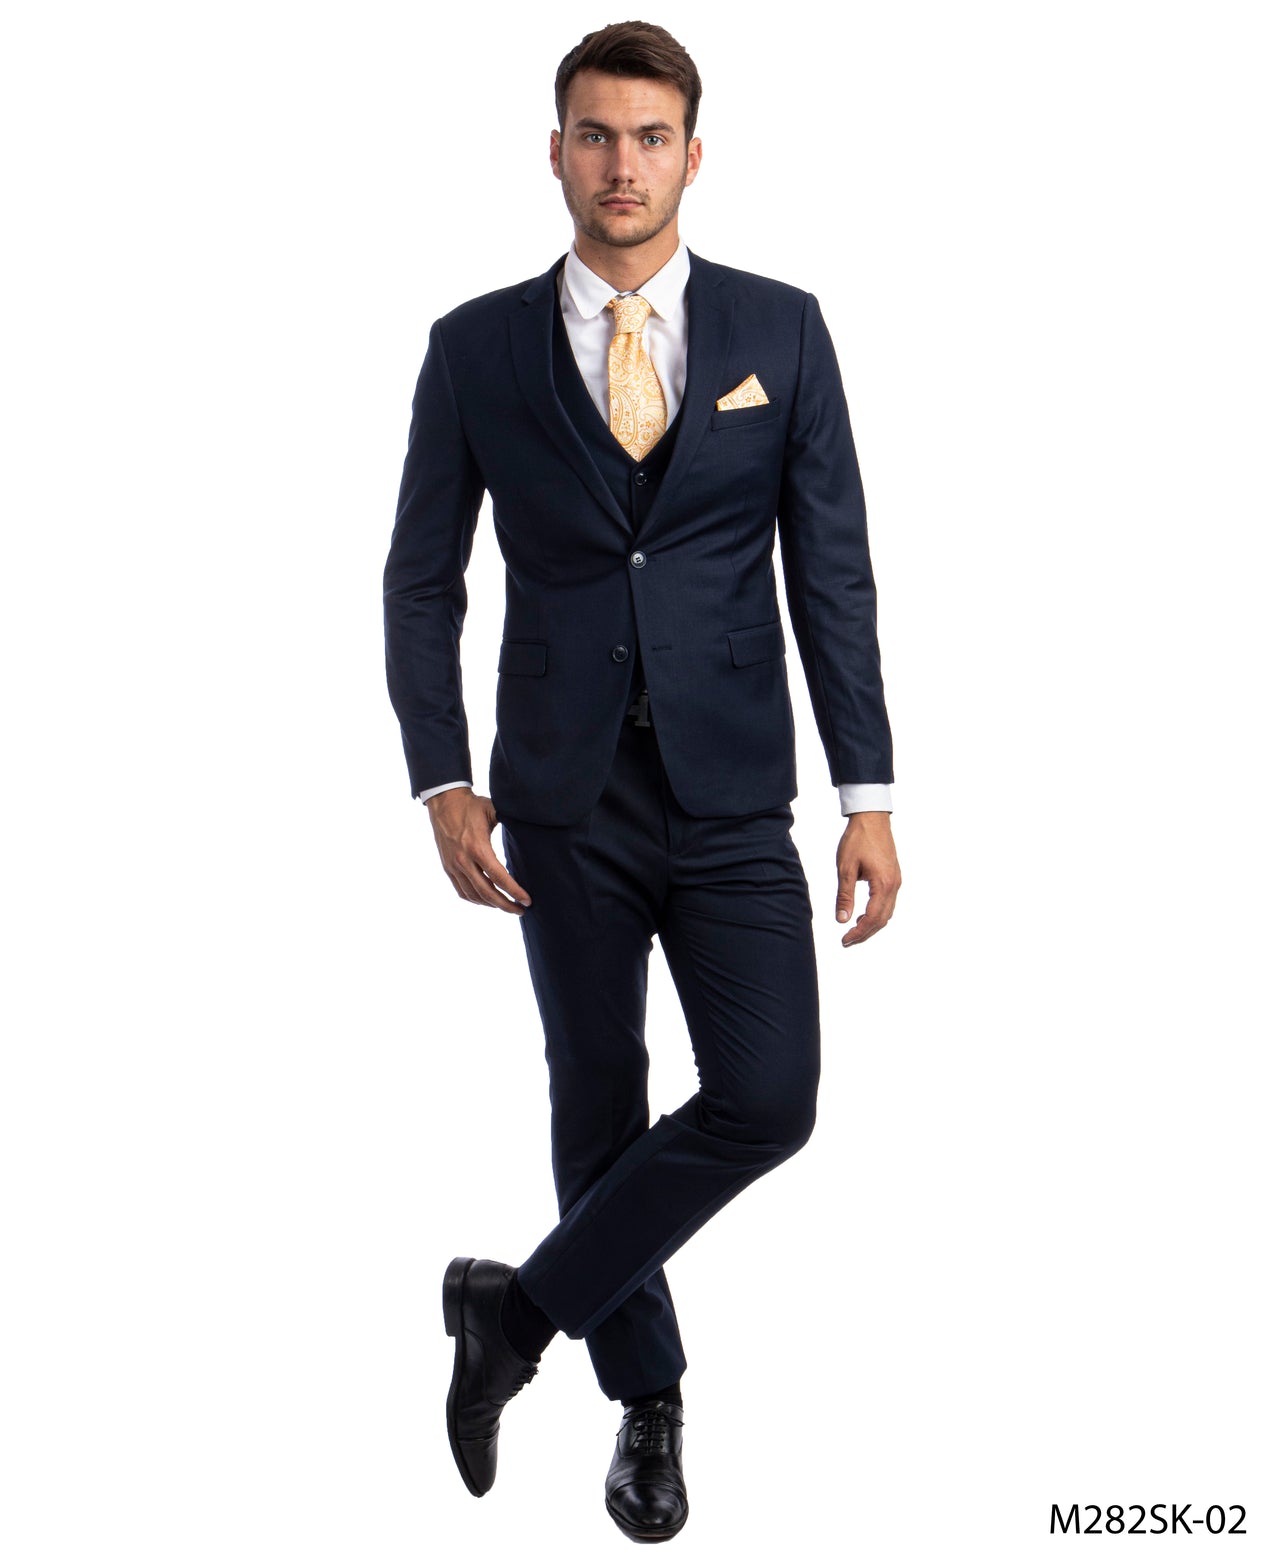 Navy Blue Suit For Men Formal Suits For All Ocassions - Hattitude